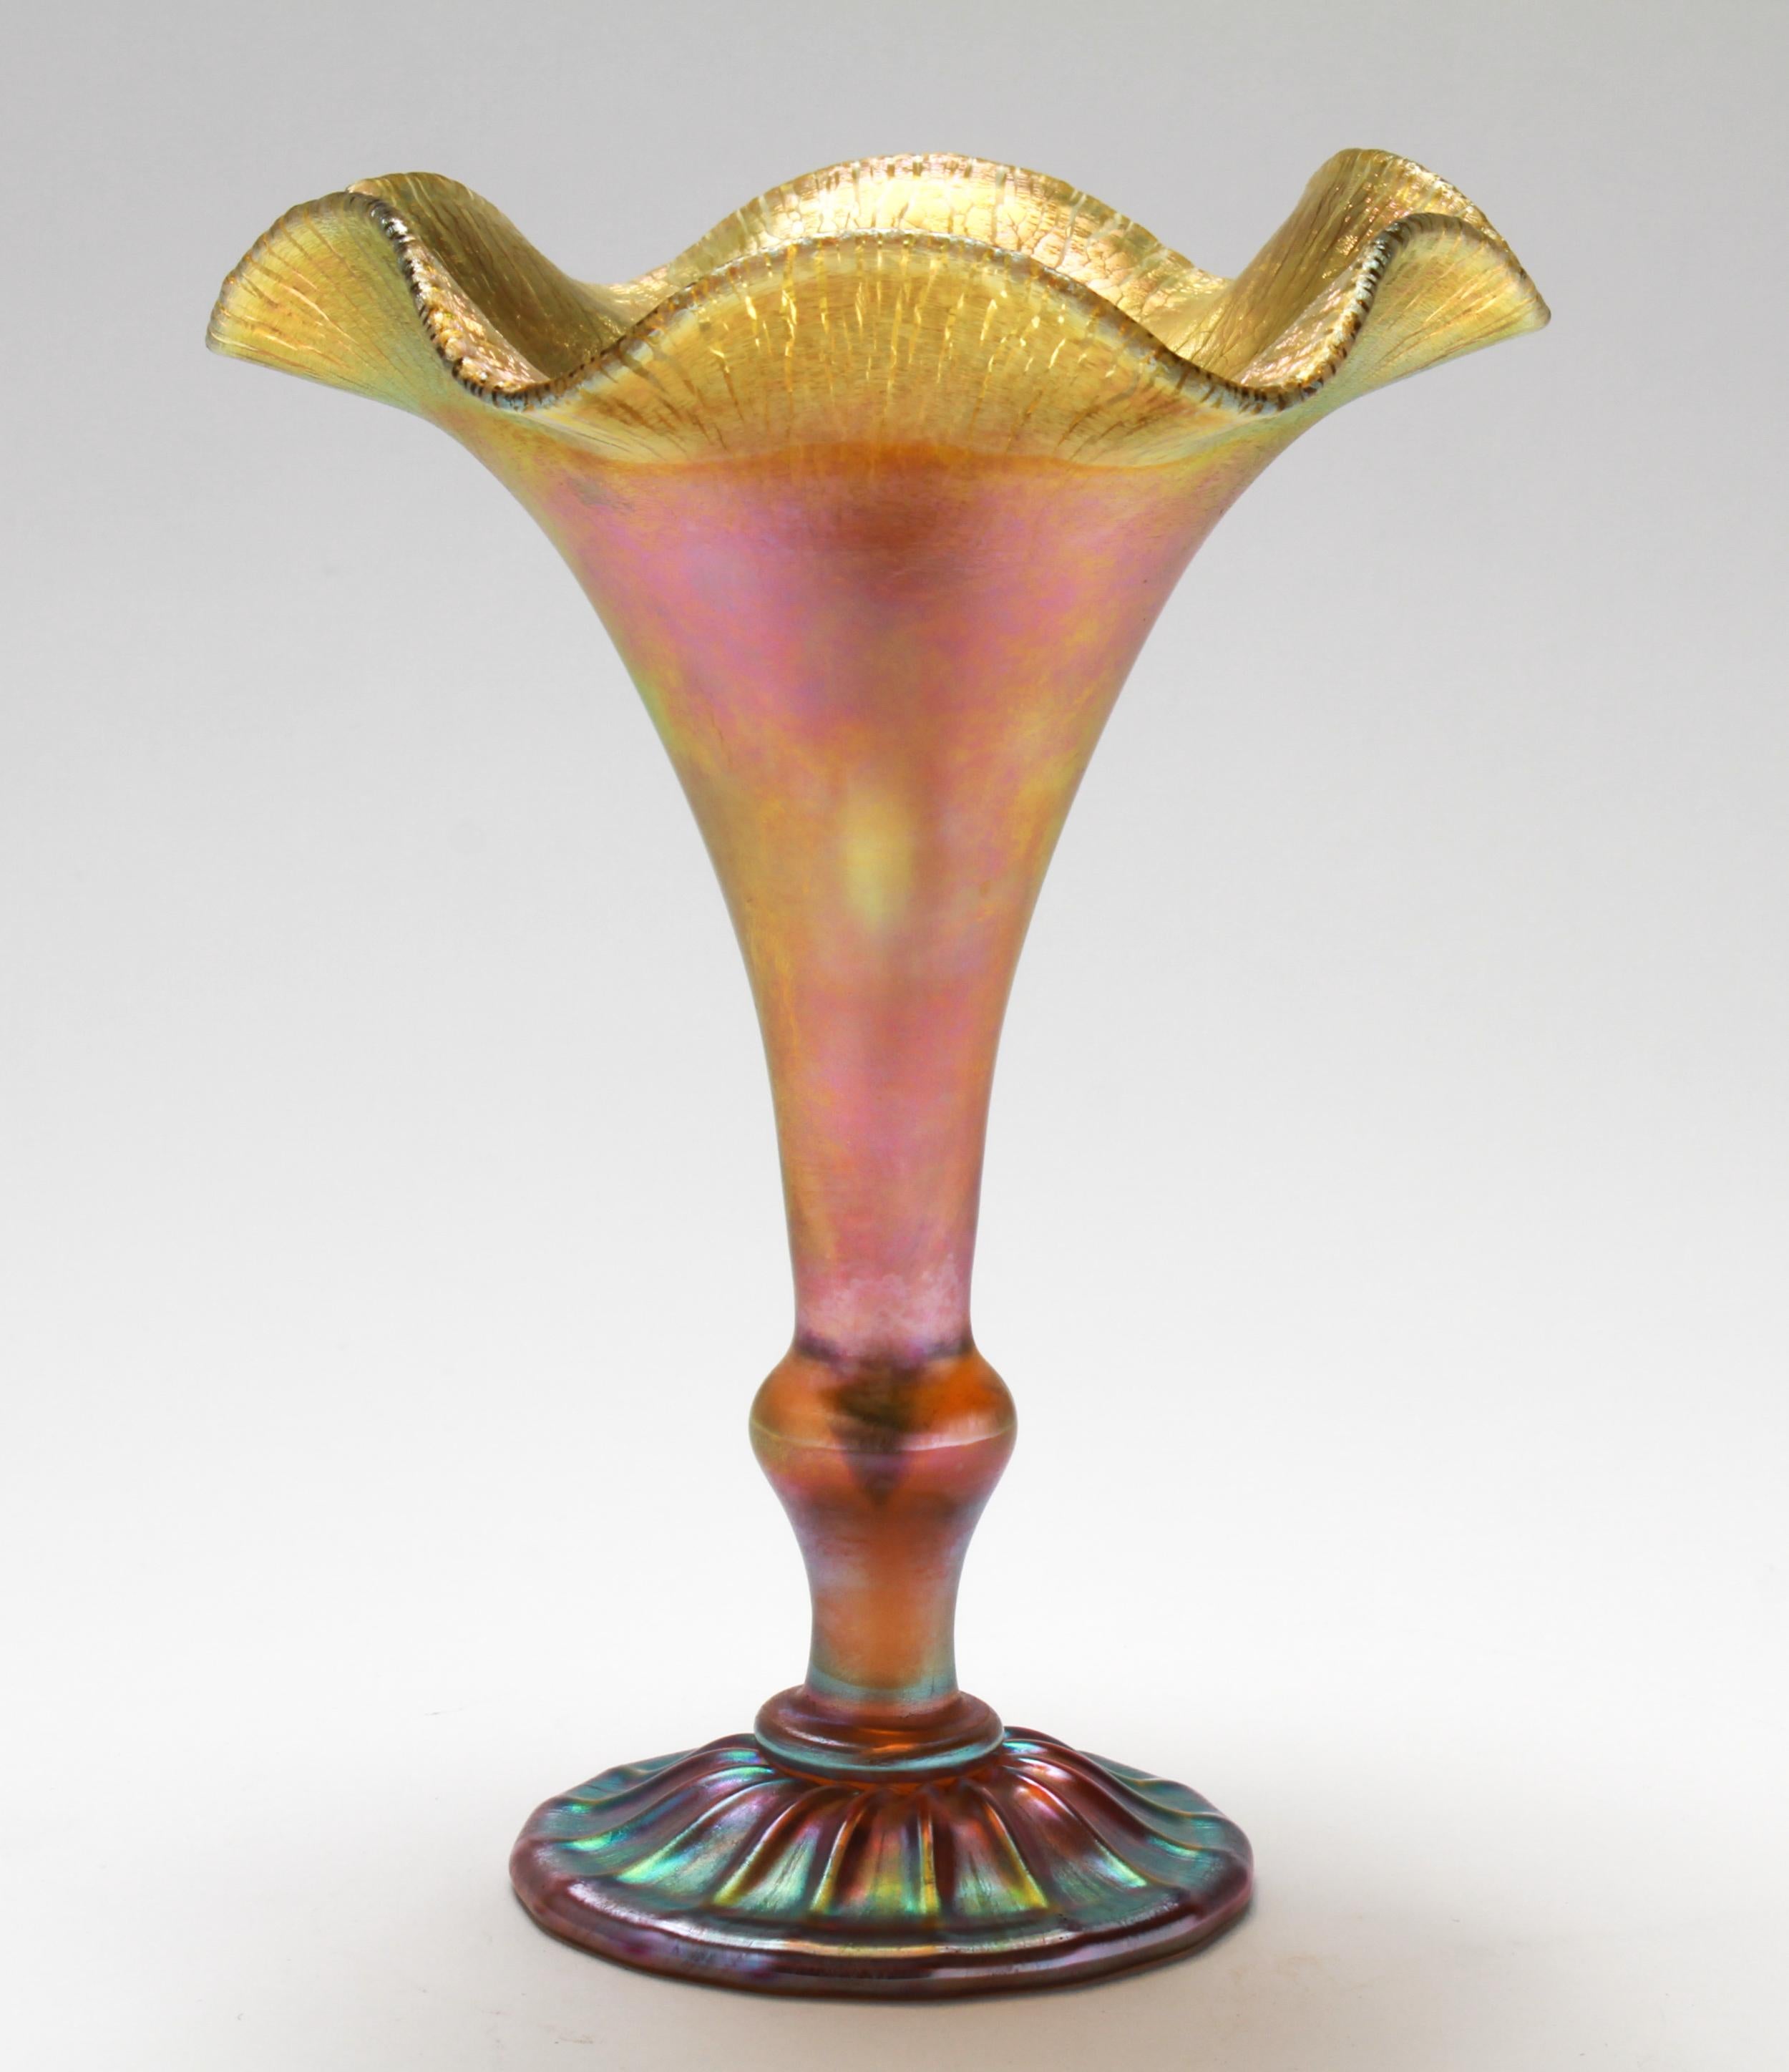 Quezal gold iridescent favrile art glass ruffled trumpet vase, bearing an etched signature and marking on the bottom: 